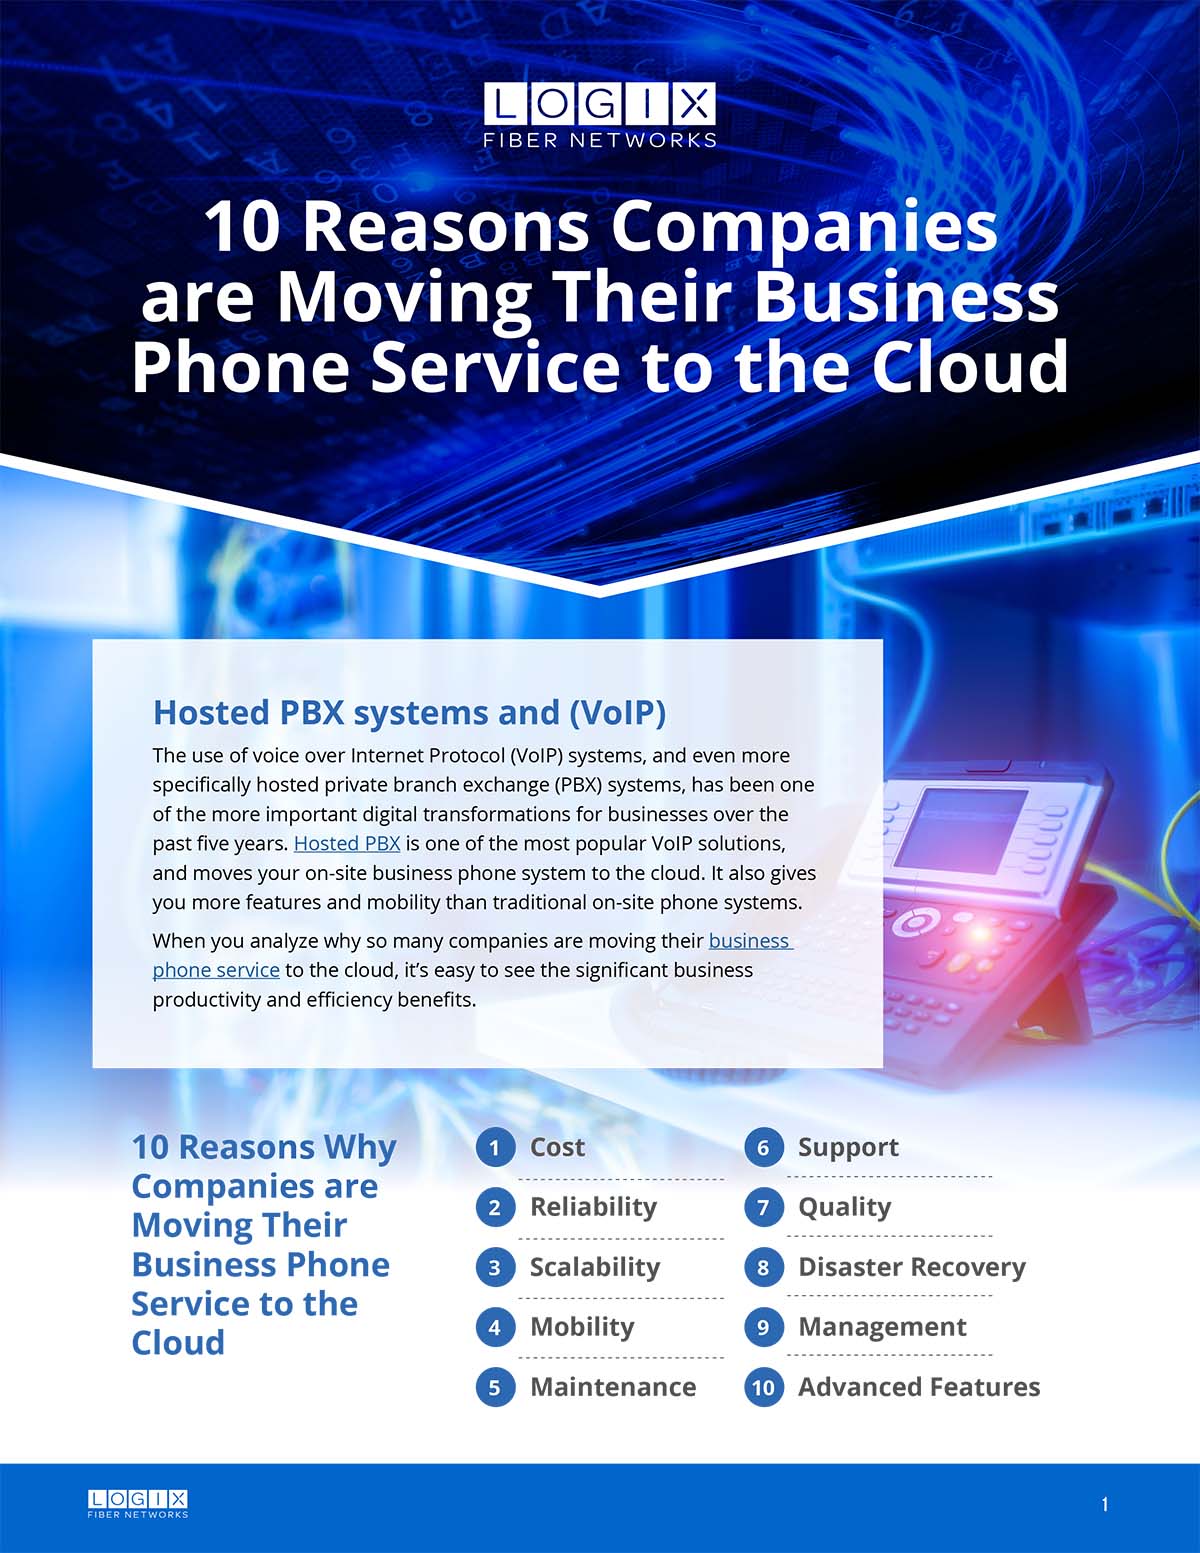 Top 10 Reasons Why Businesses Are Choosing Phone Service in the Cloud